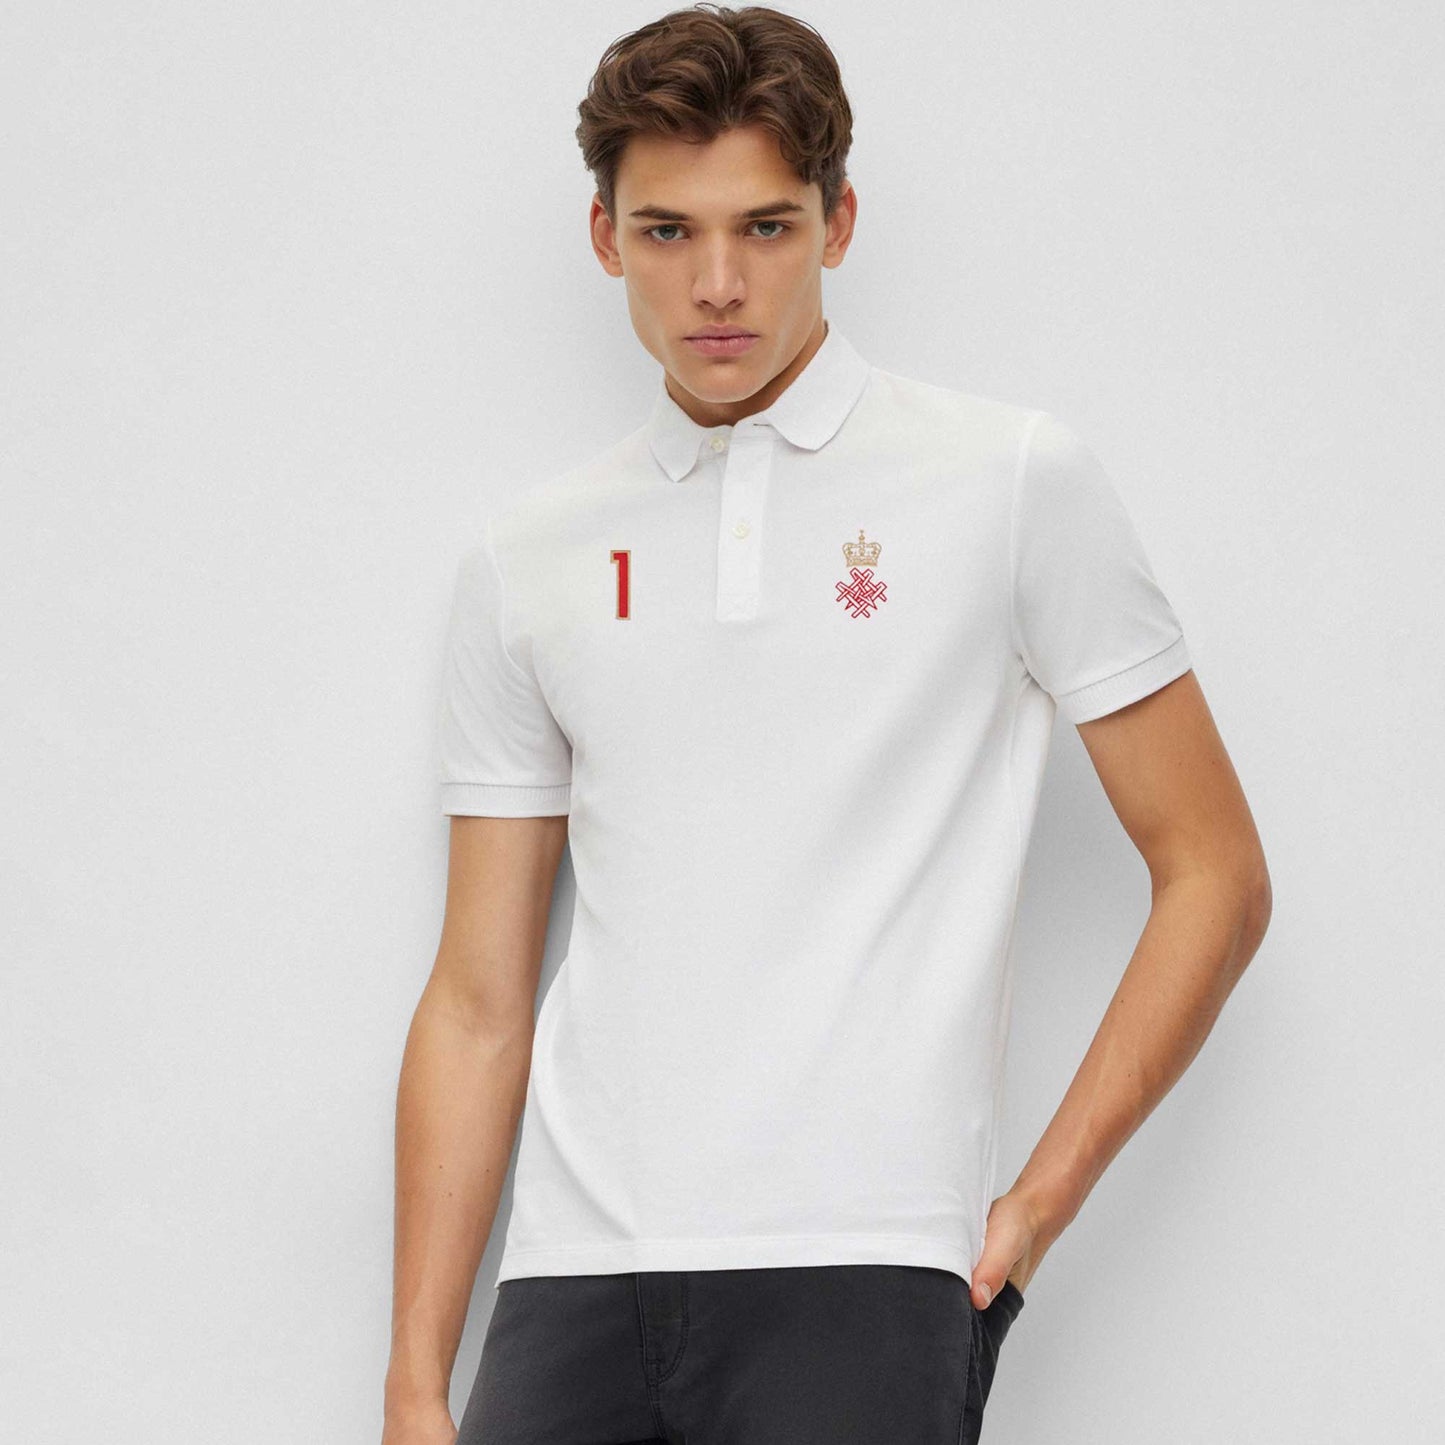 Polo Republica Men's Crown Emblem & 1 Embroidered Short Sleeve Polo Shirt